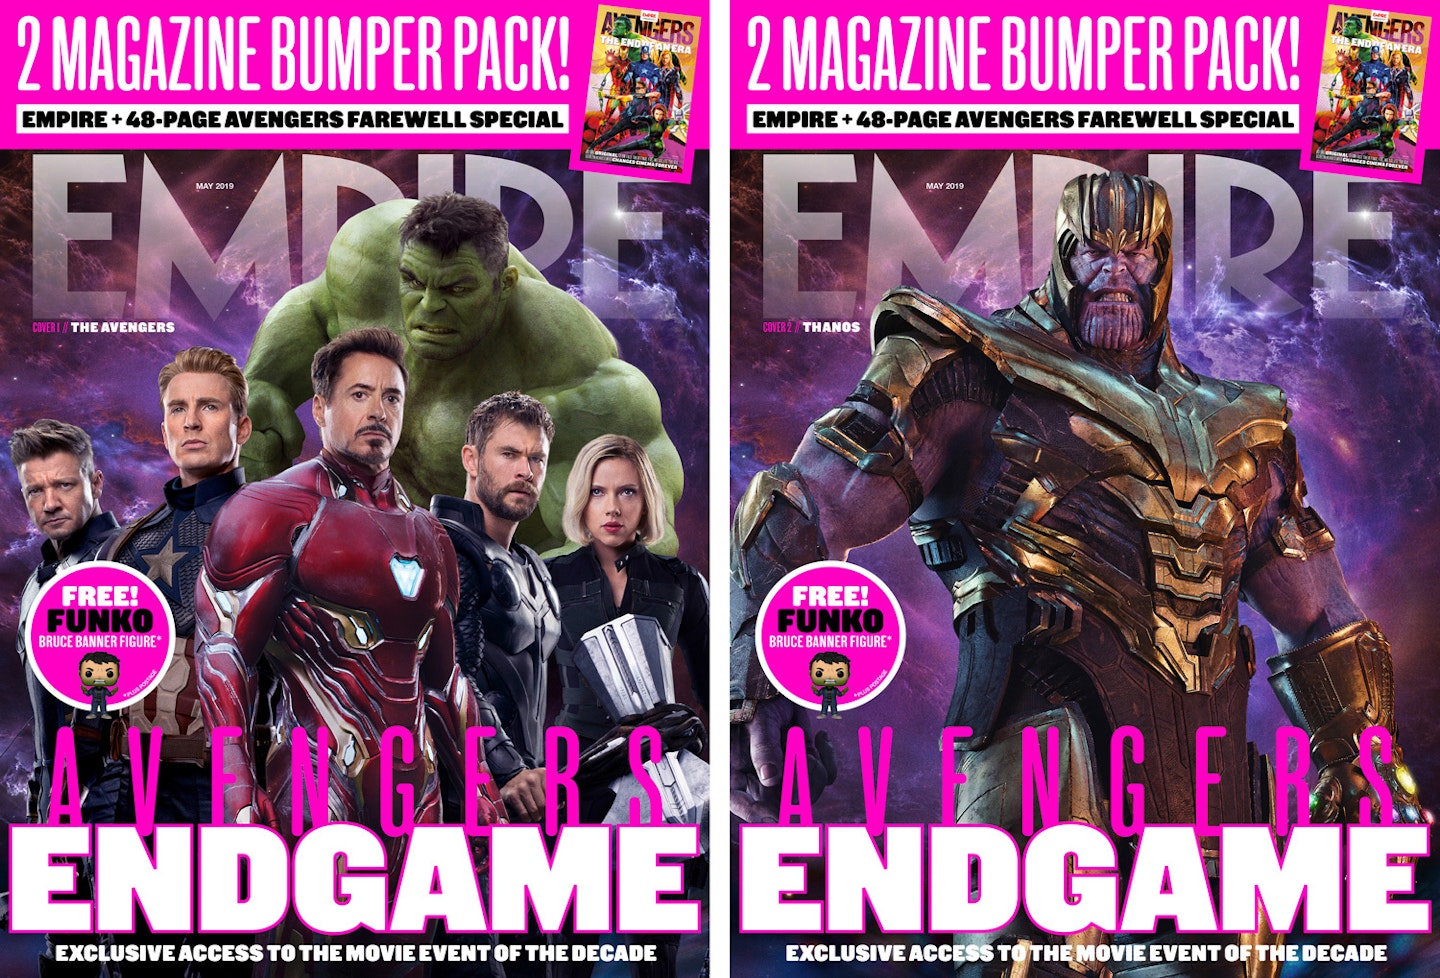 Empire - May 2019 Avengers Endgame covers